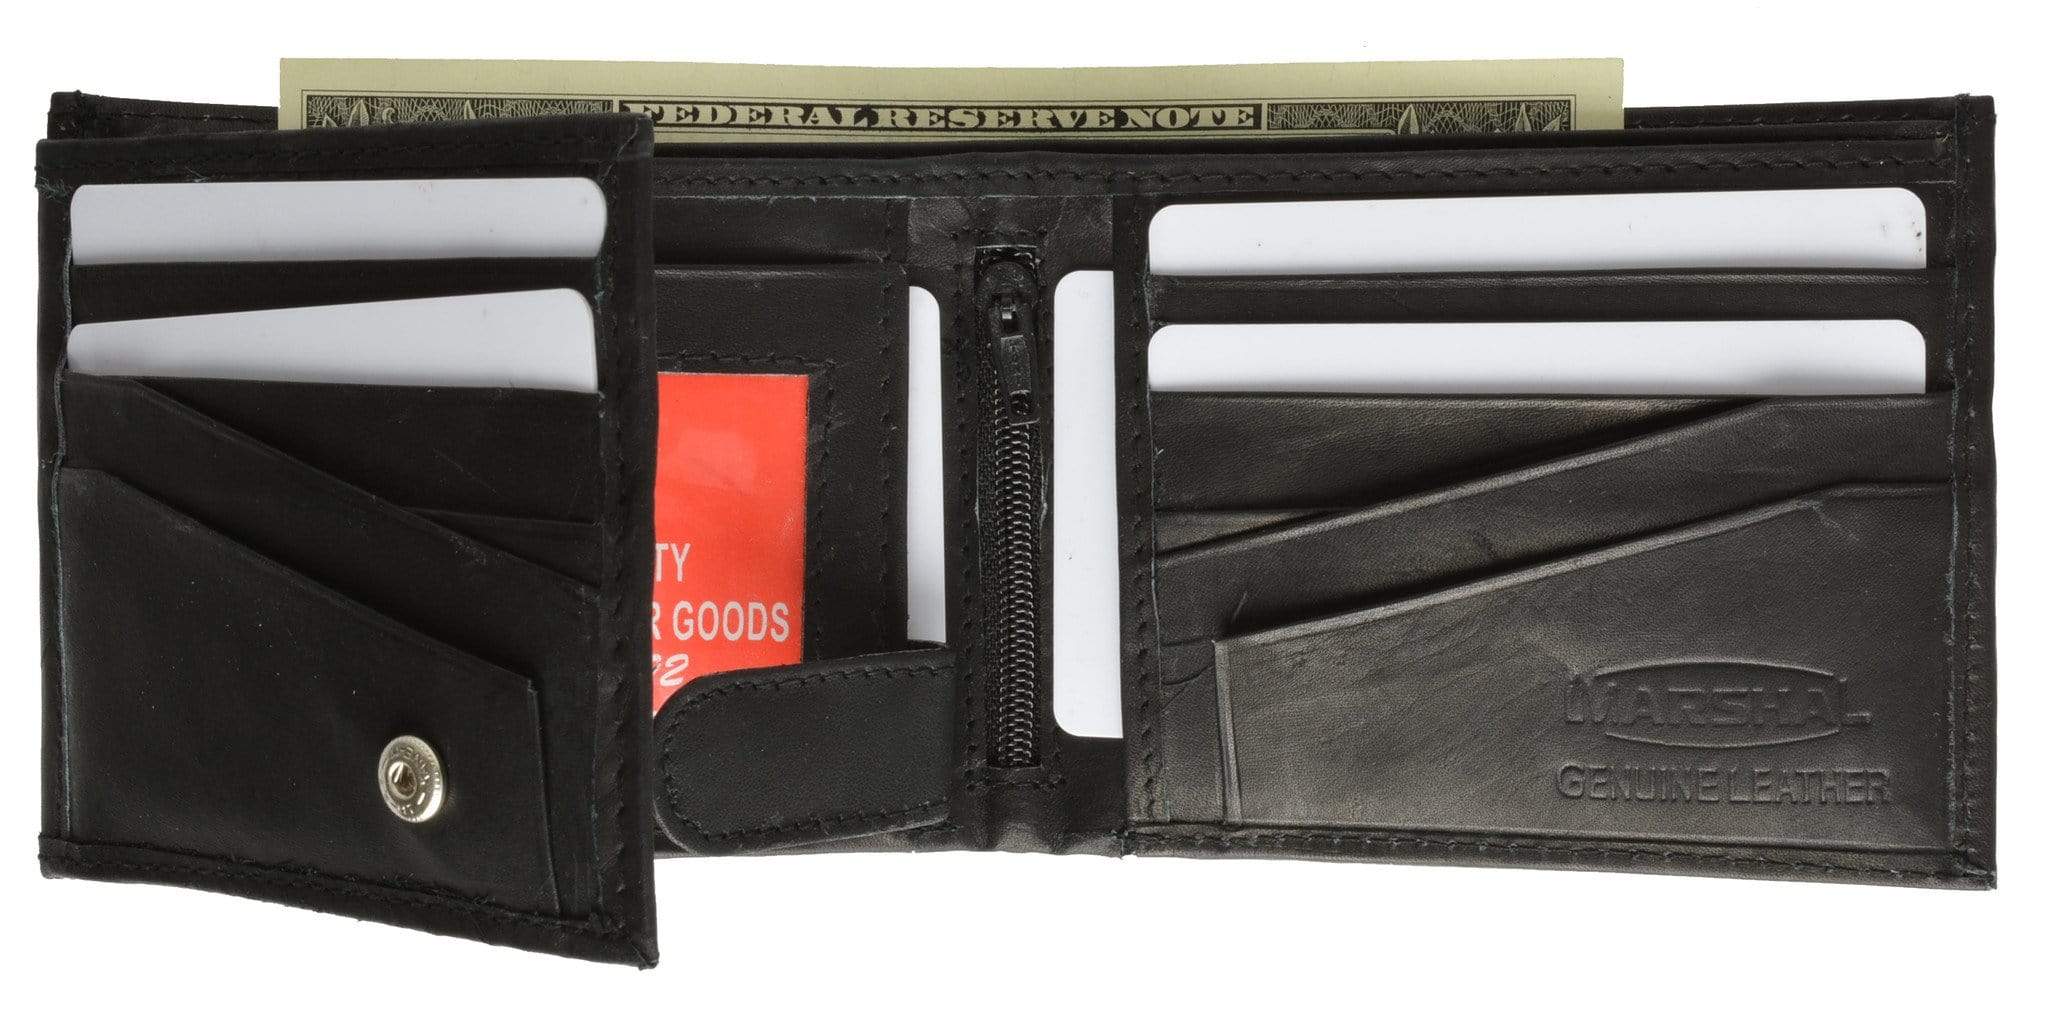 Ashwood Mens Bifold Leather Wallet with Snap Closure Black